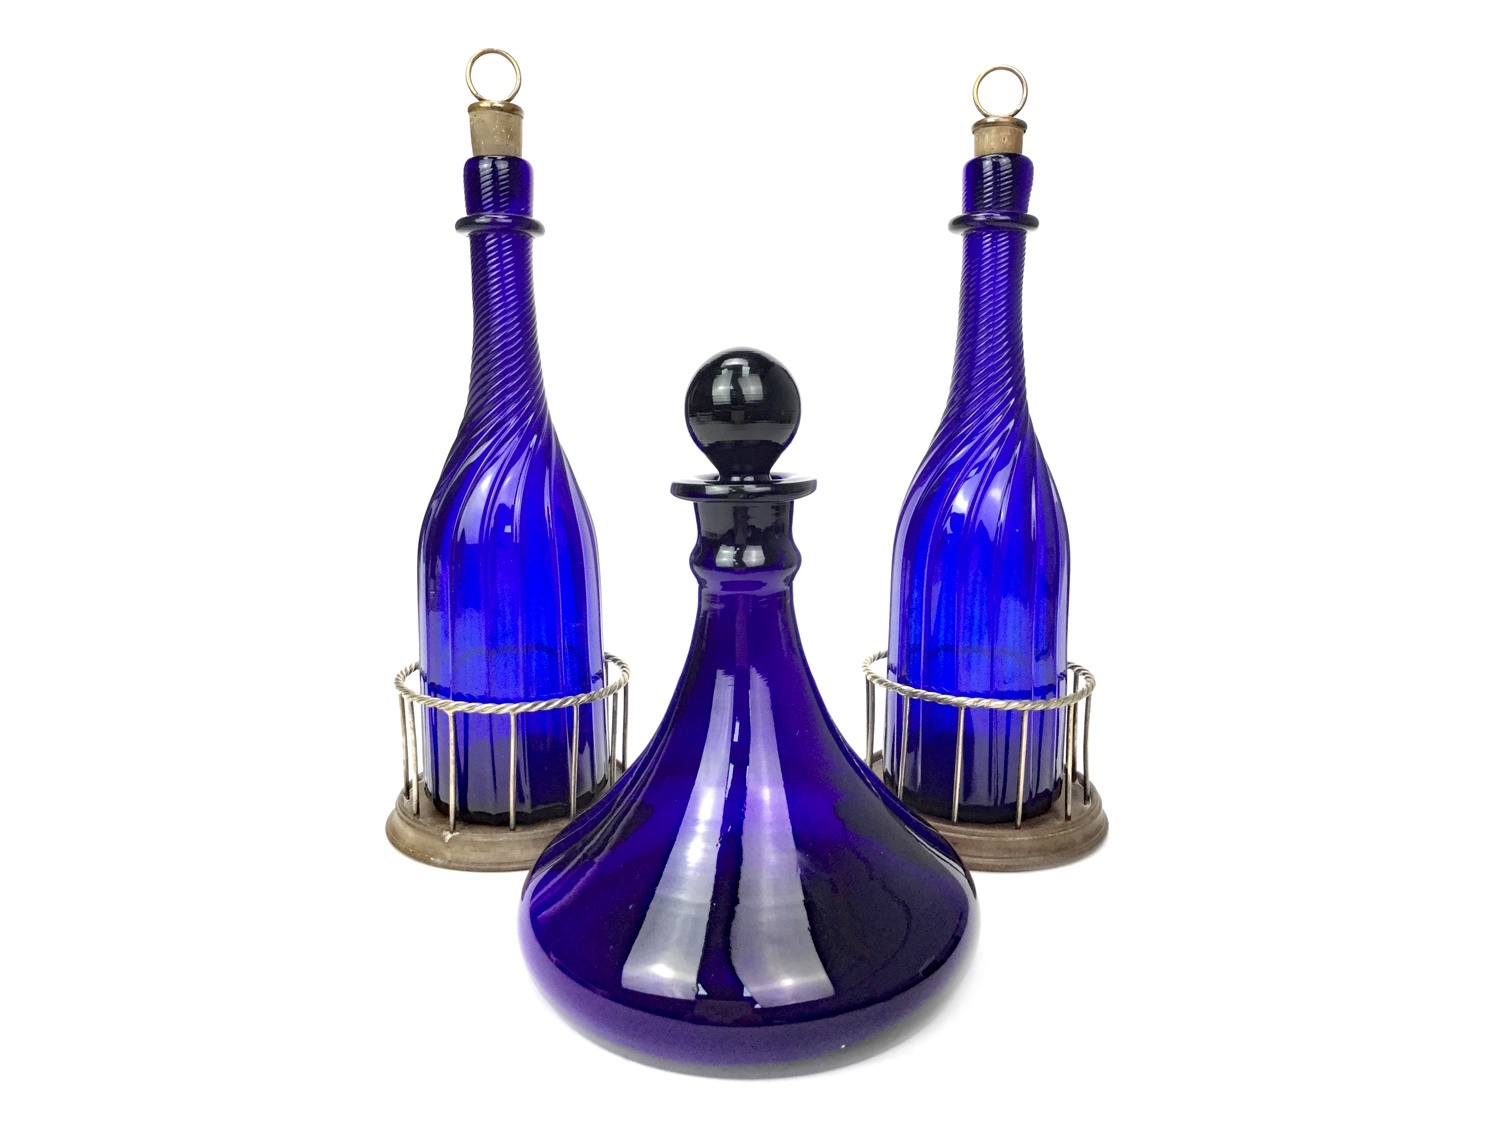 A PAIR OF WILLIAM IV BRISTOL BLUE GLASS DECANTERS AND A SHIPS DECANTER